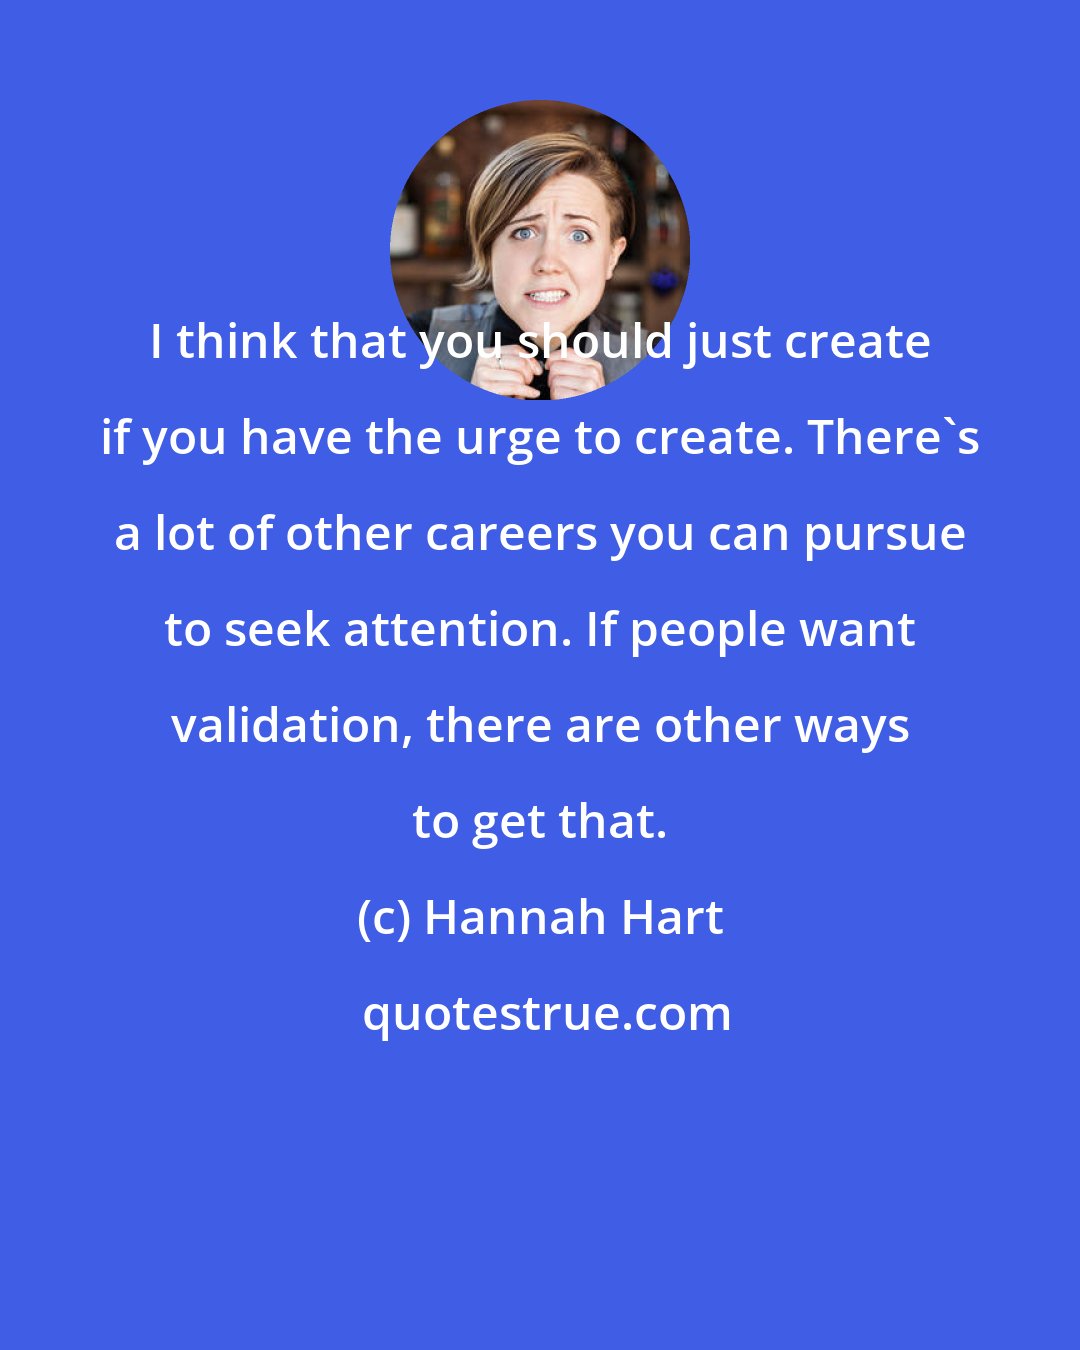 Hannah Hart: I think that you should just create if you have the urge to create. There's a lot of other careers you can pursue to seek attention. If people want validation, there are other ways to get that.